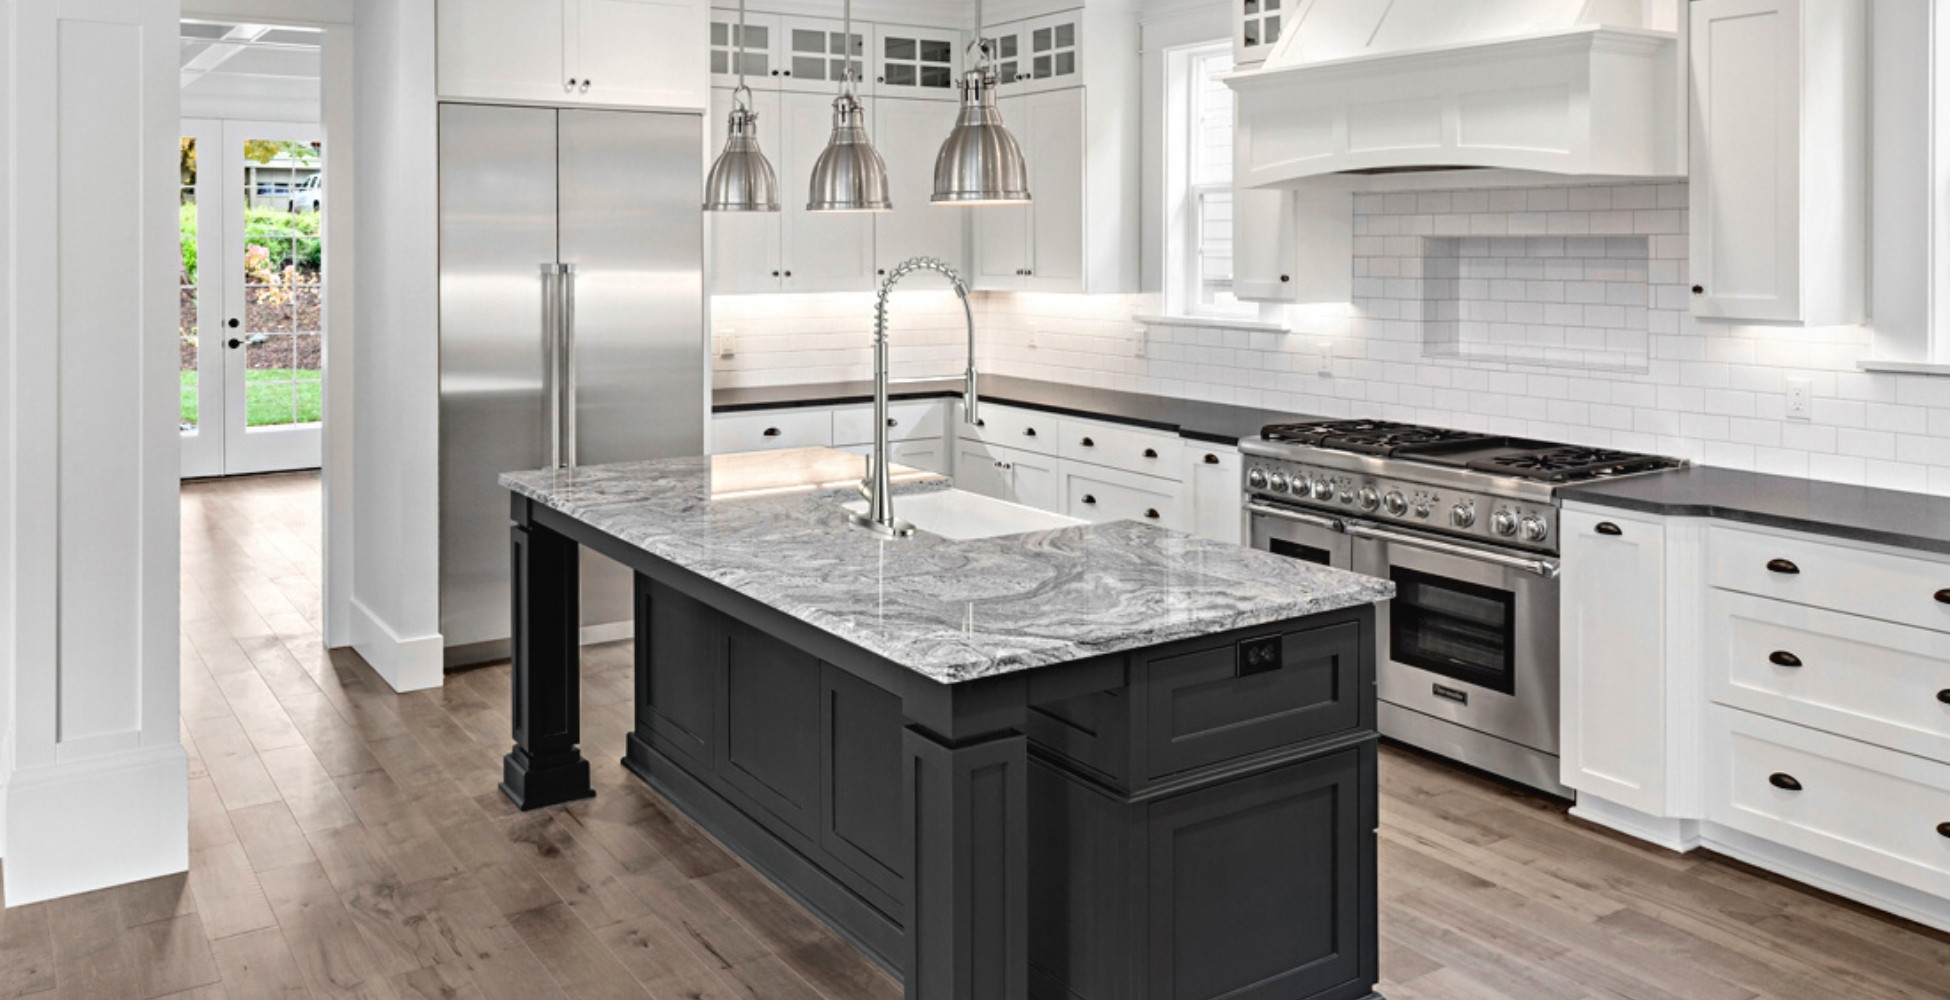 A beautiful kitchen design featuring a Pioneer faucet